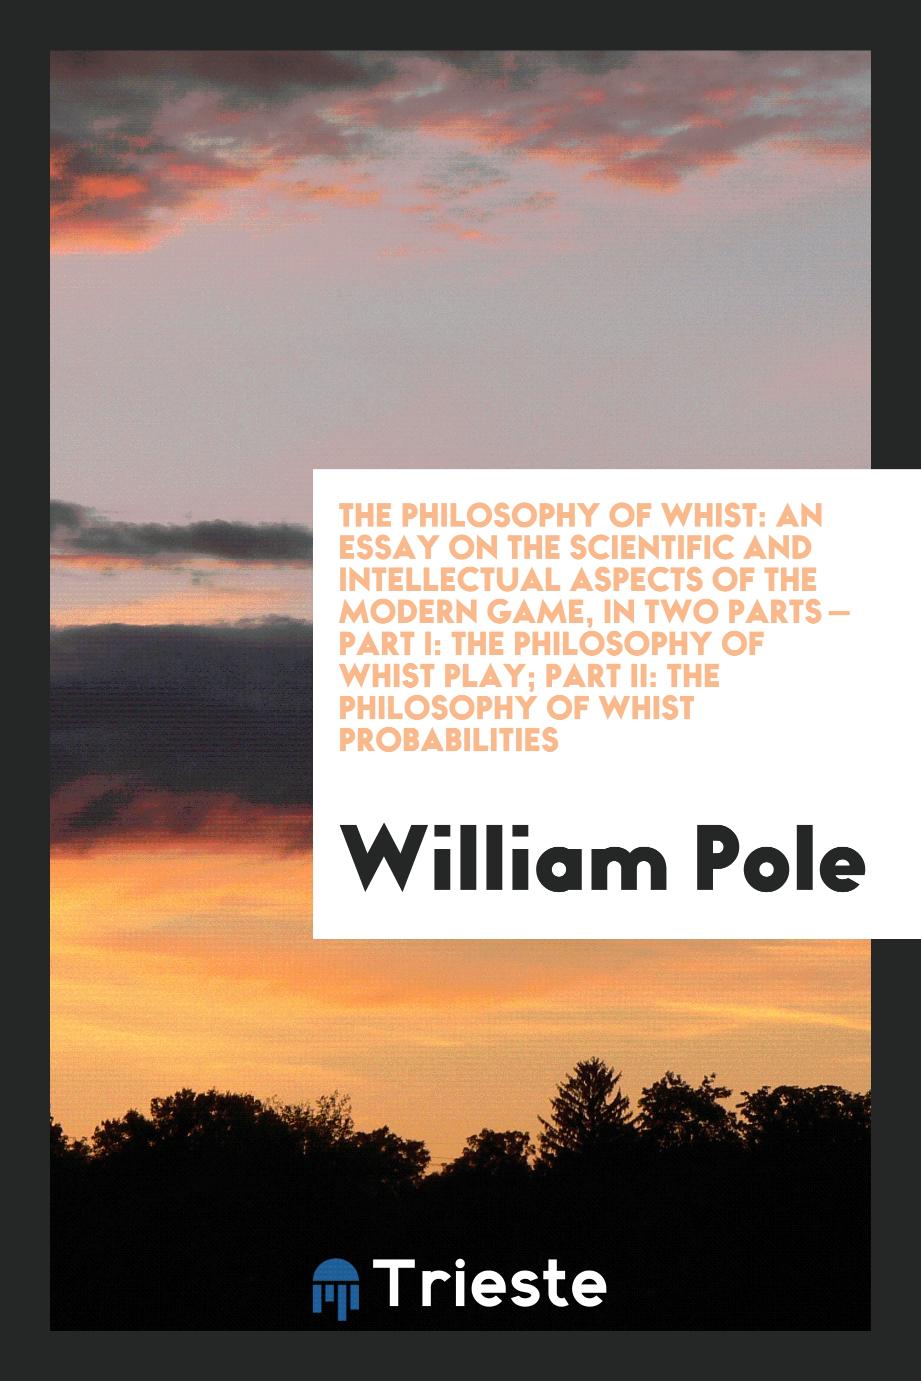 The Philosophy of Whist: An Essay on the Scientific and Intellectual Aspects of the Modern Game, in Two Parts — Part I: the Philosophy of Whist Play; Part II: The Philosophy of Whist Probabilities